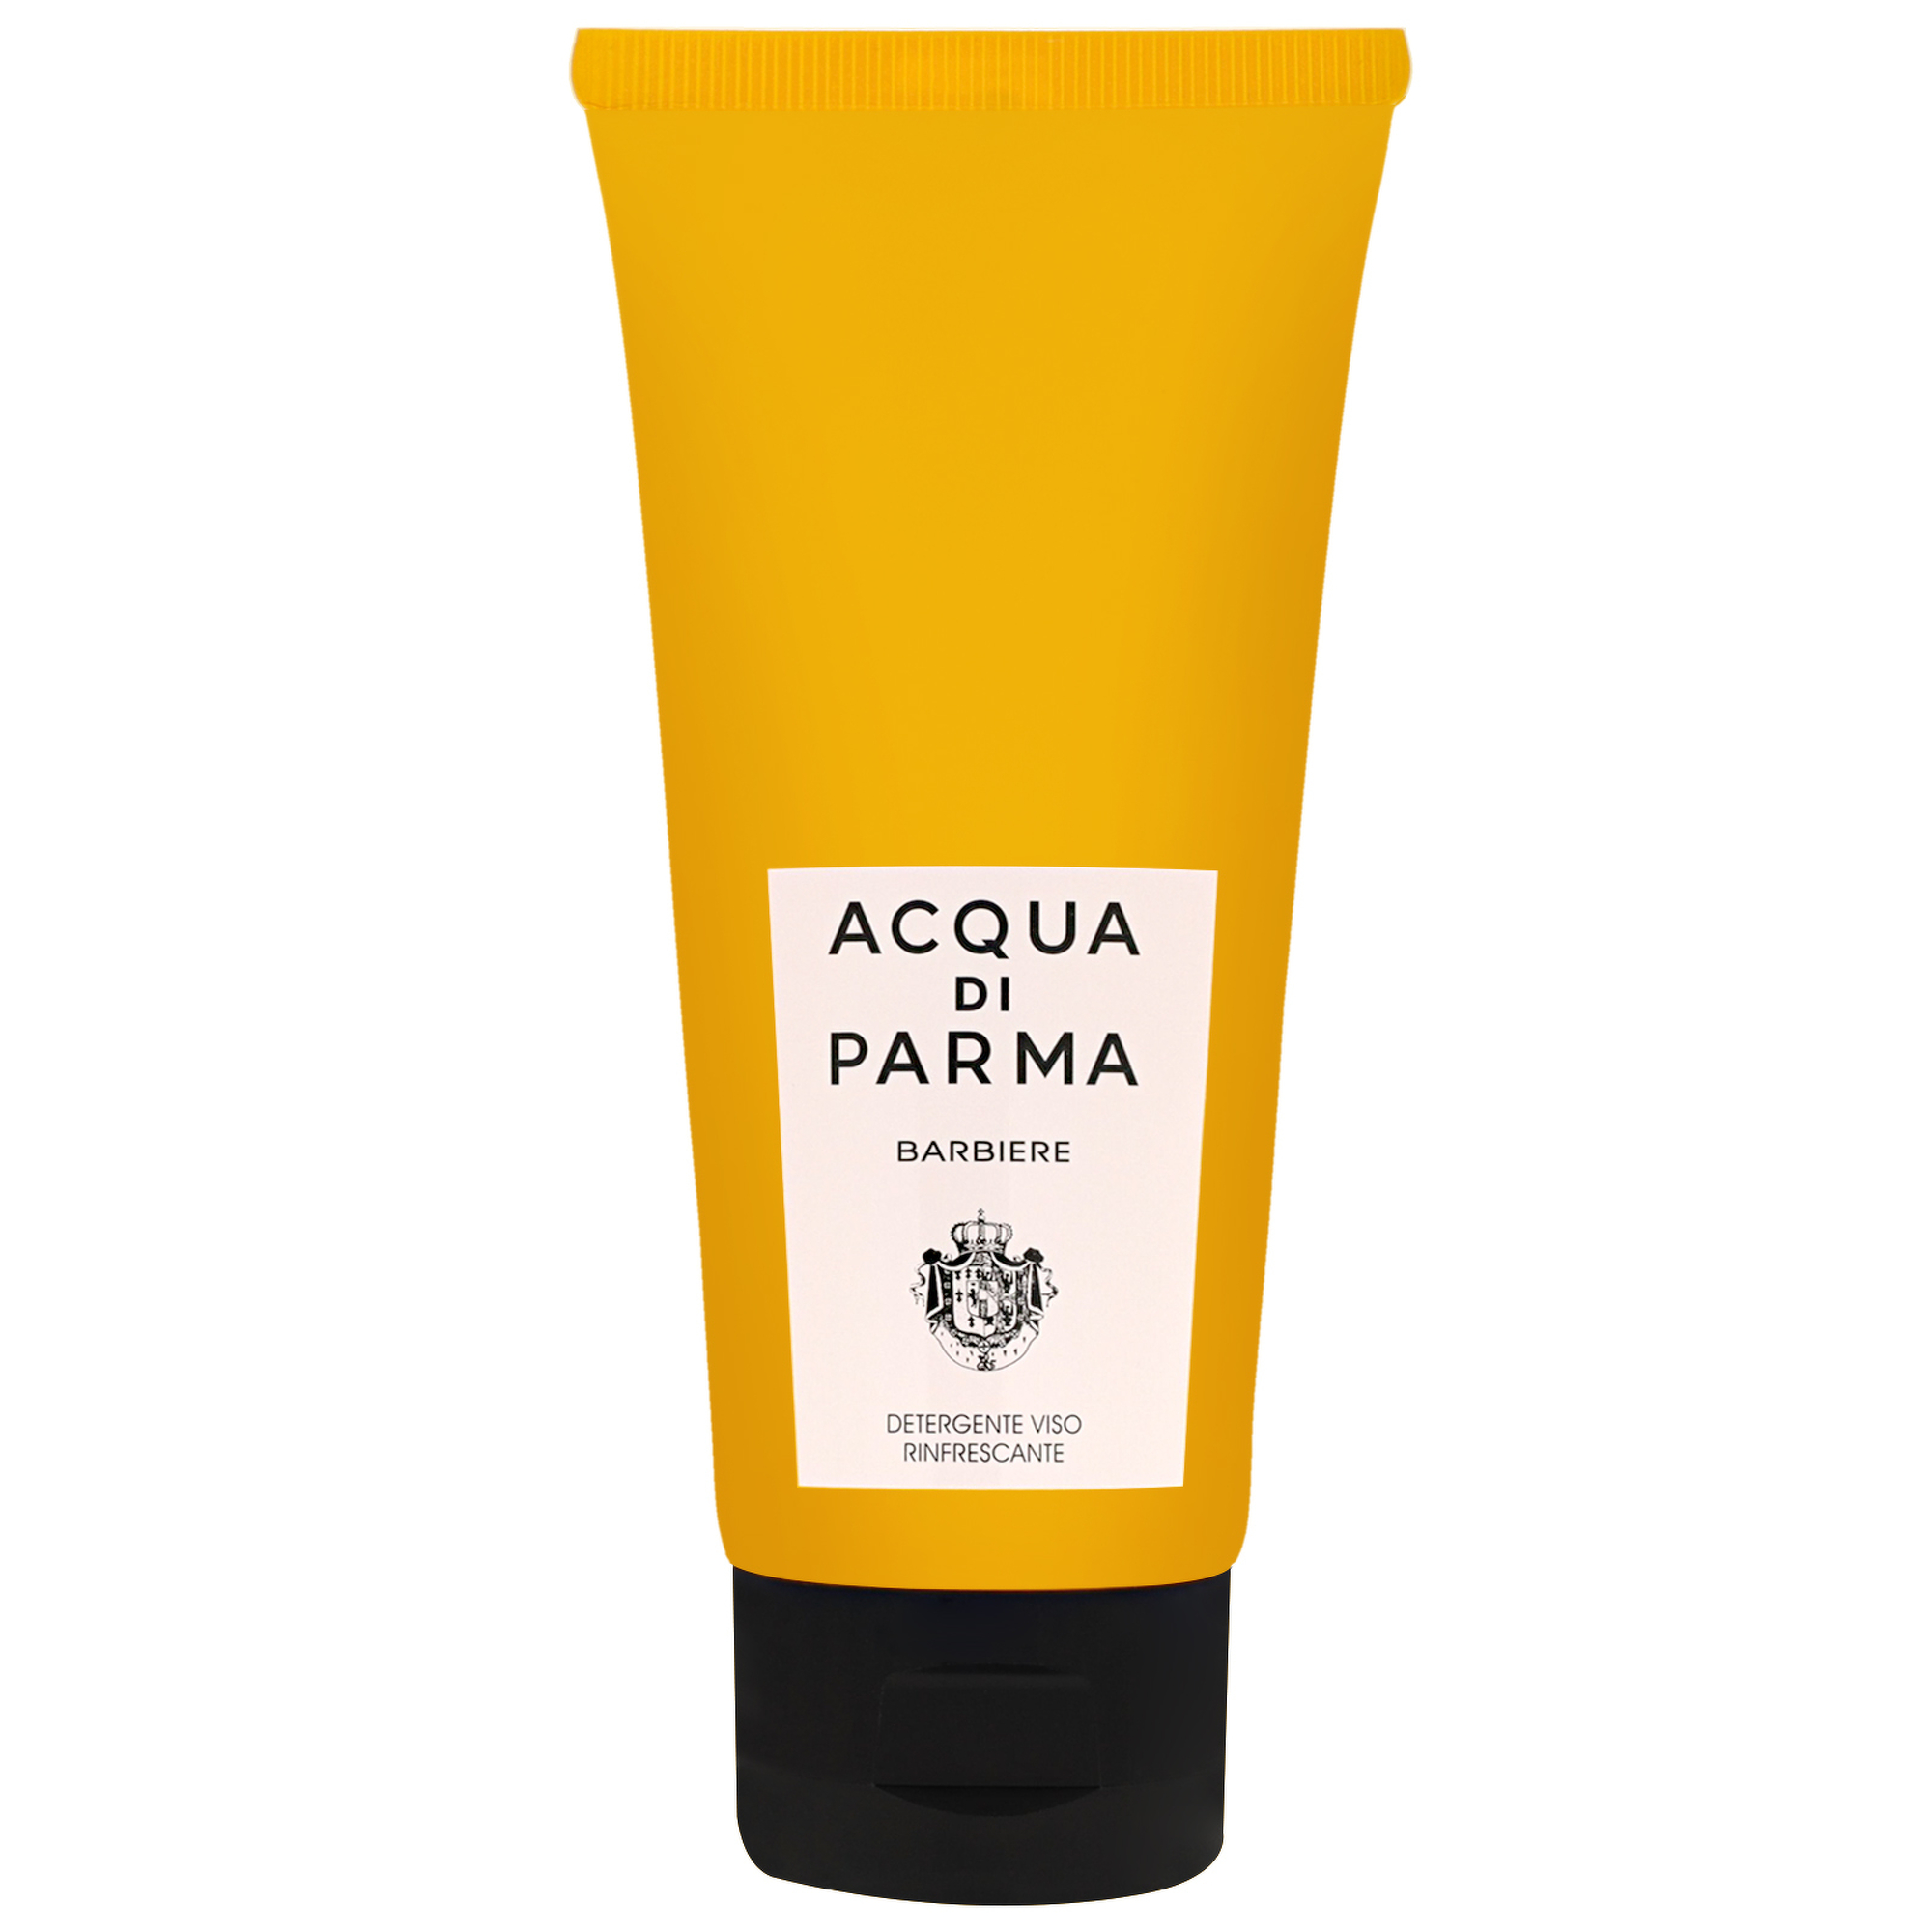 Photos - Facial / Body Cleansing Product Acqua di Parma Barbiere Refreshing Face Wash 100ml 